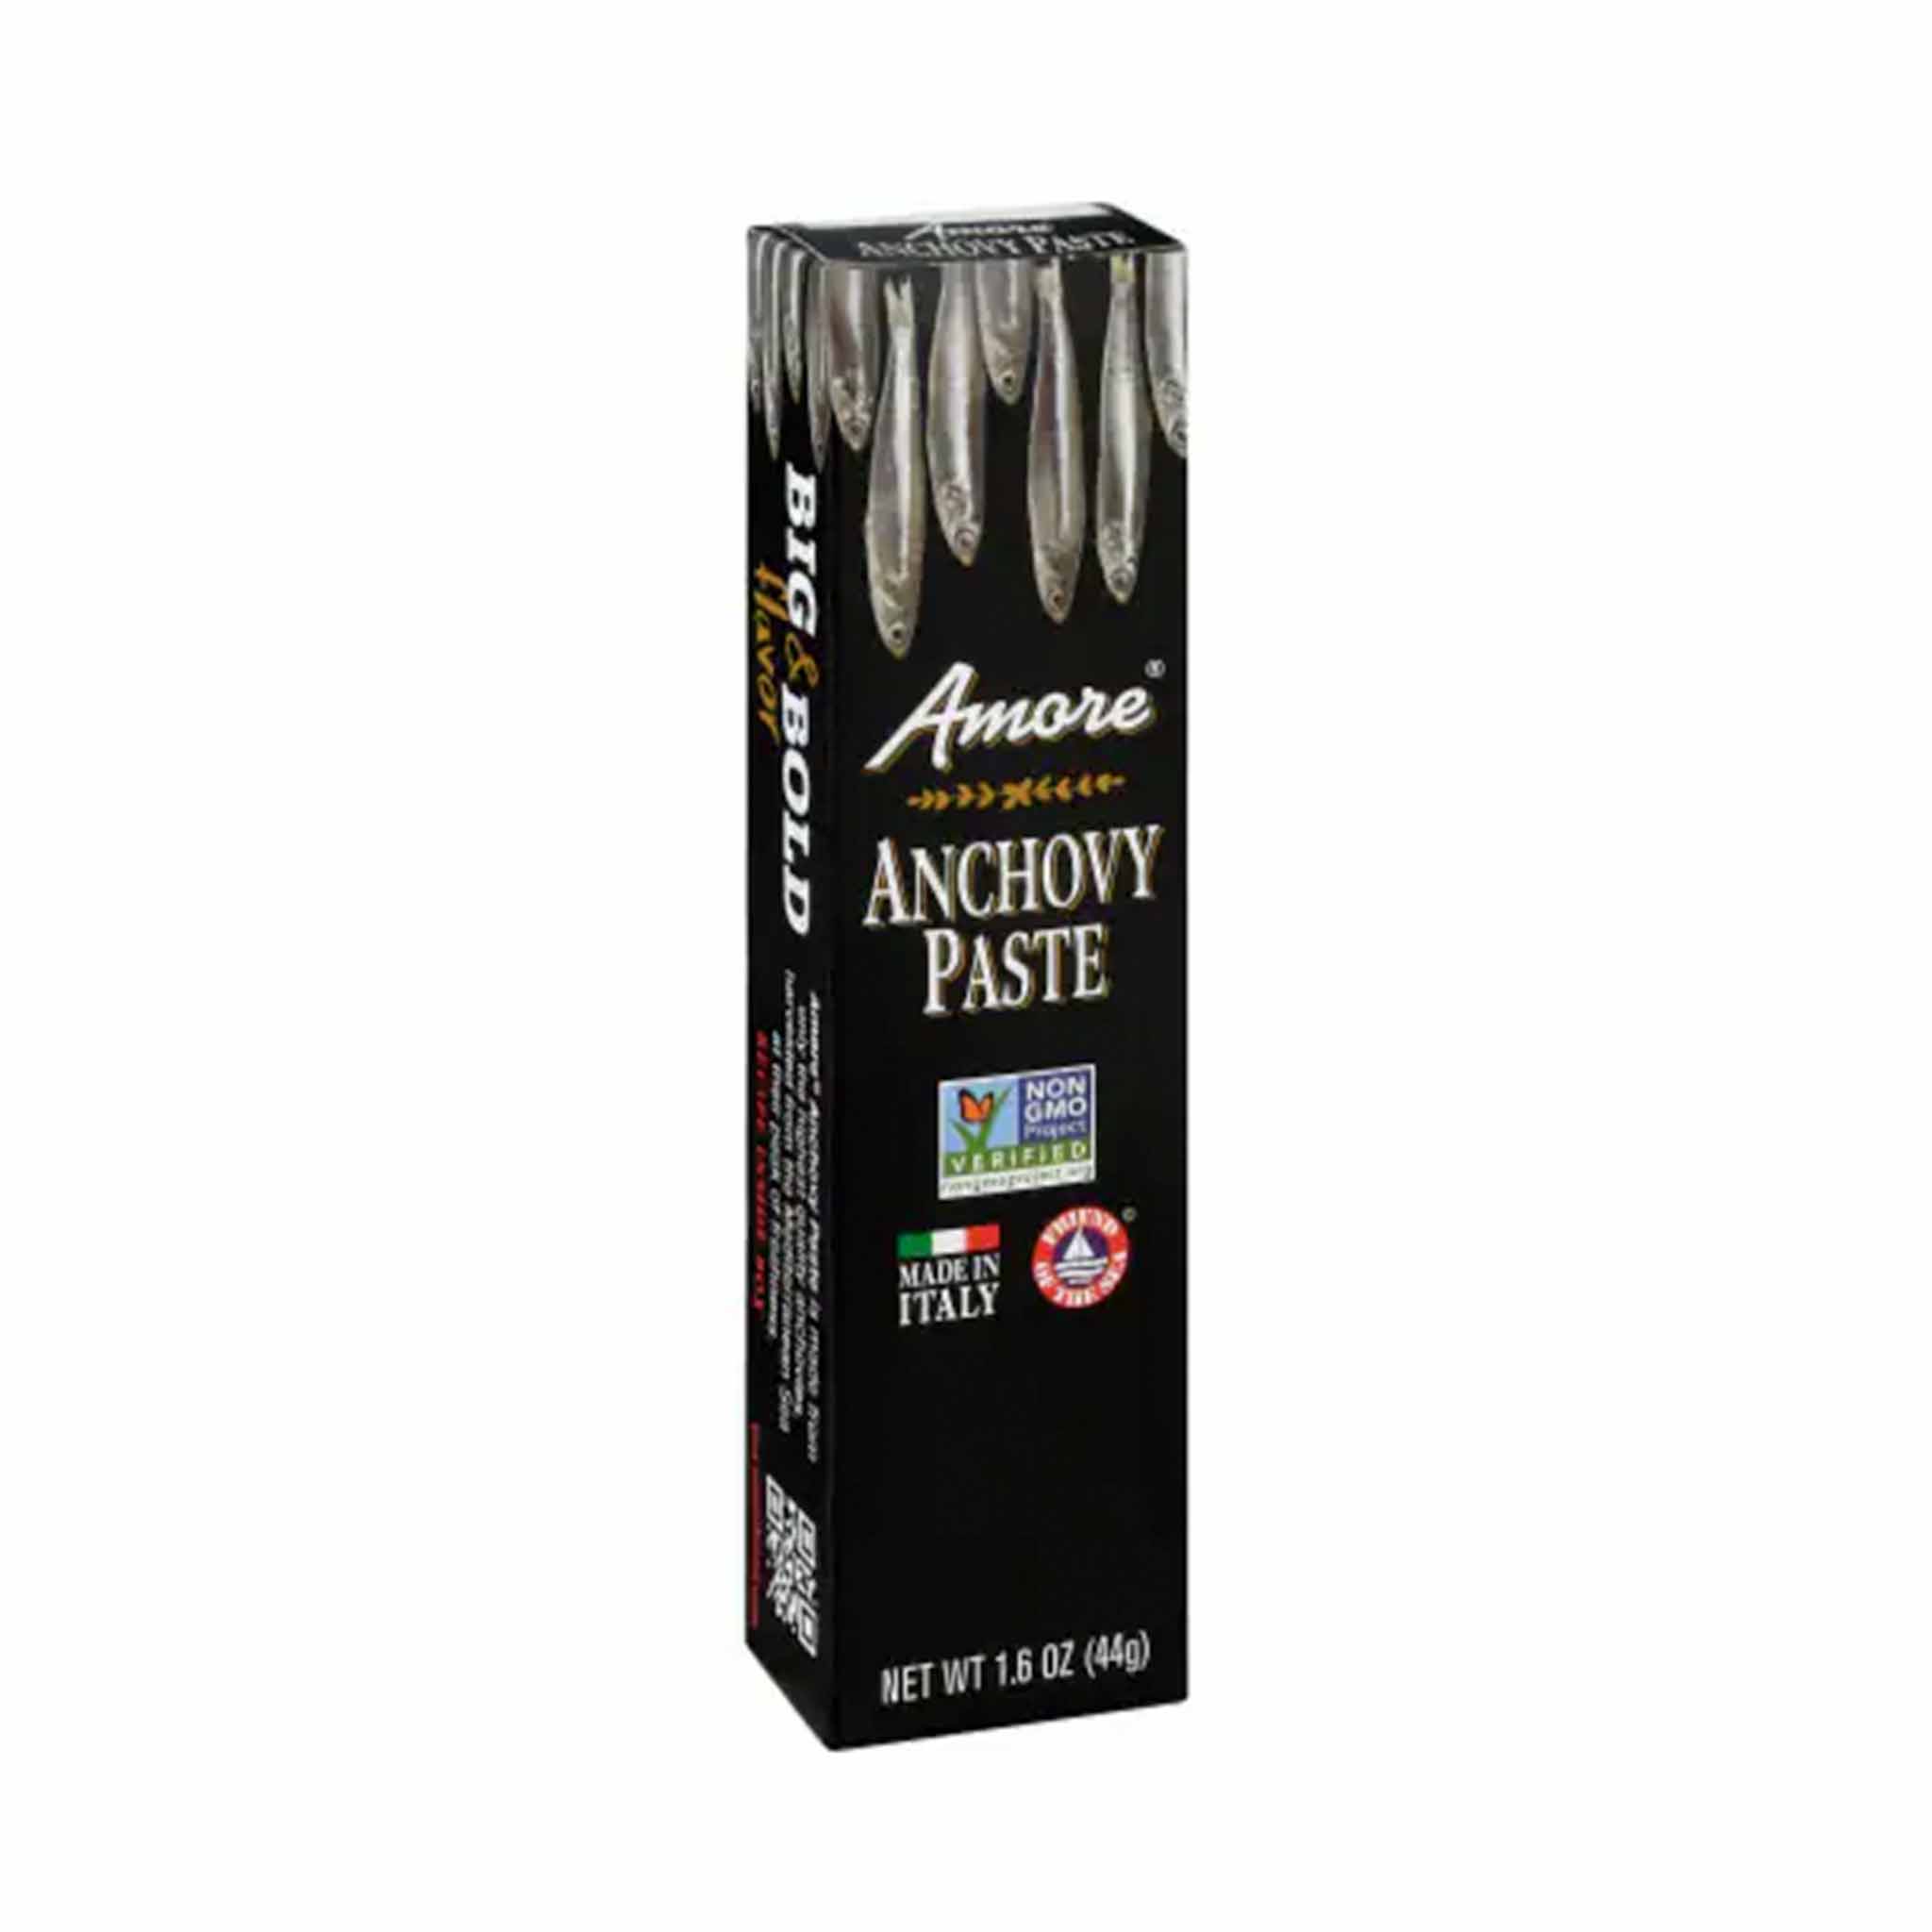 Amore Anchovy Paste Made in Italy